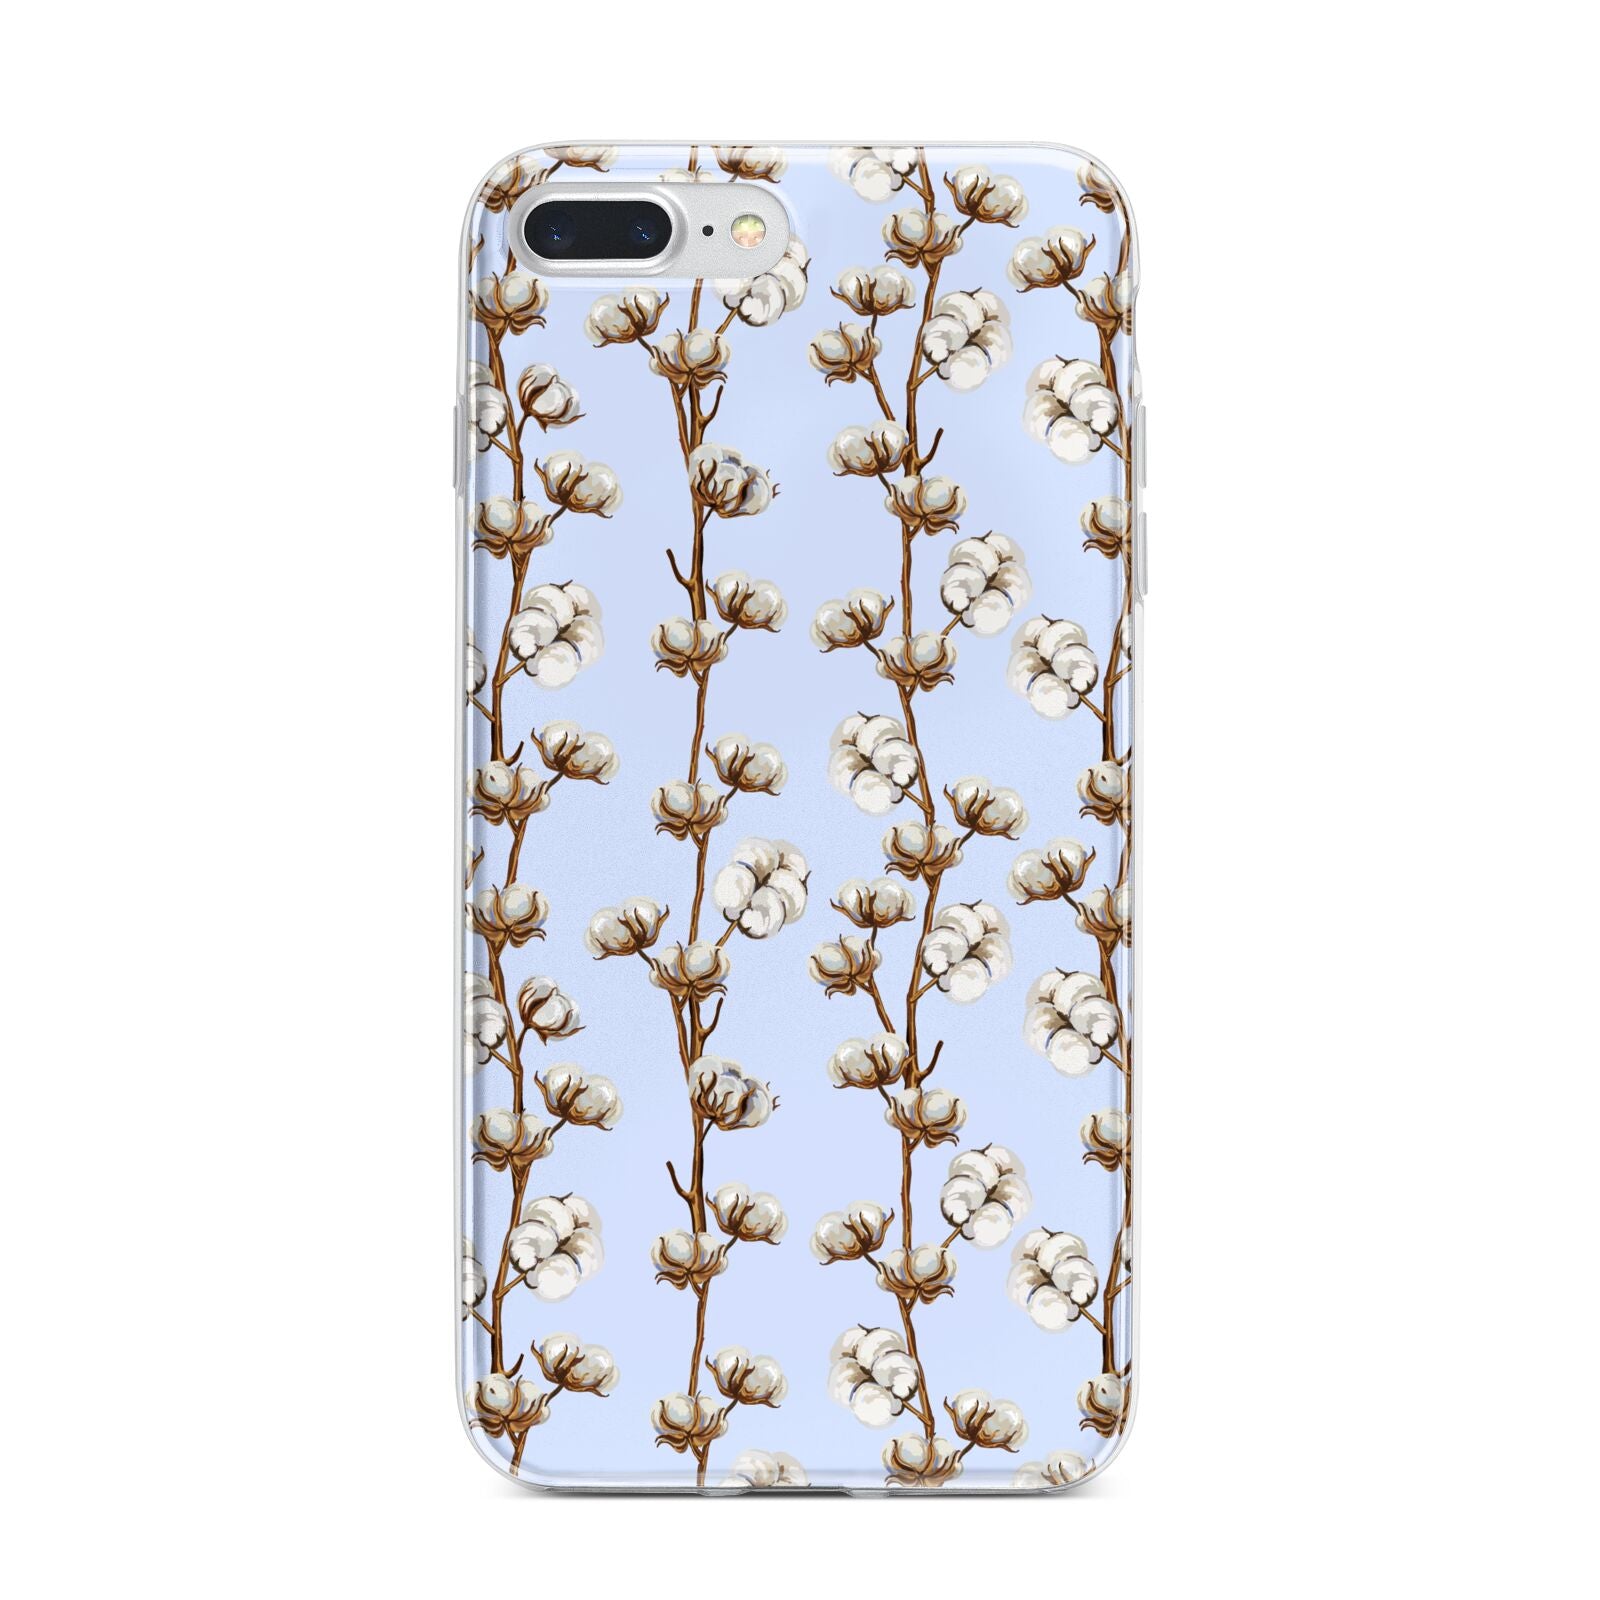 Cotton Branch iPhone 7 Plus Bumper Case on Silver iPhone